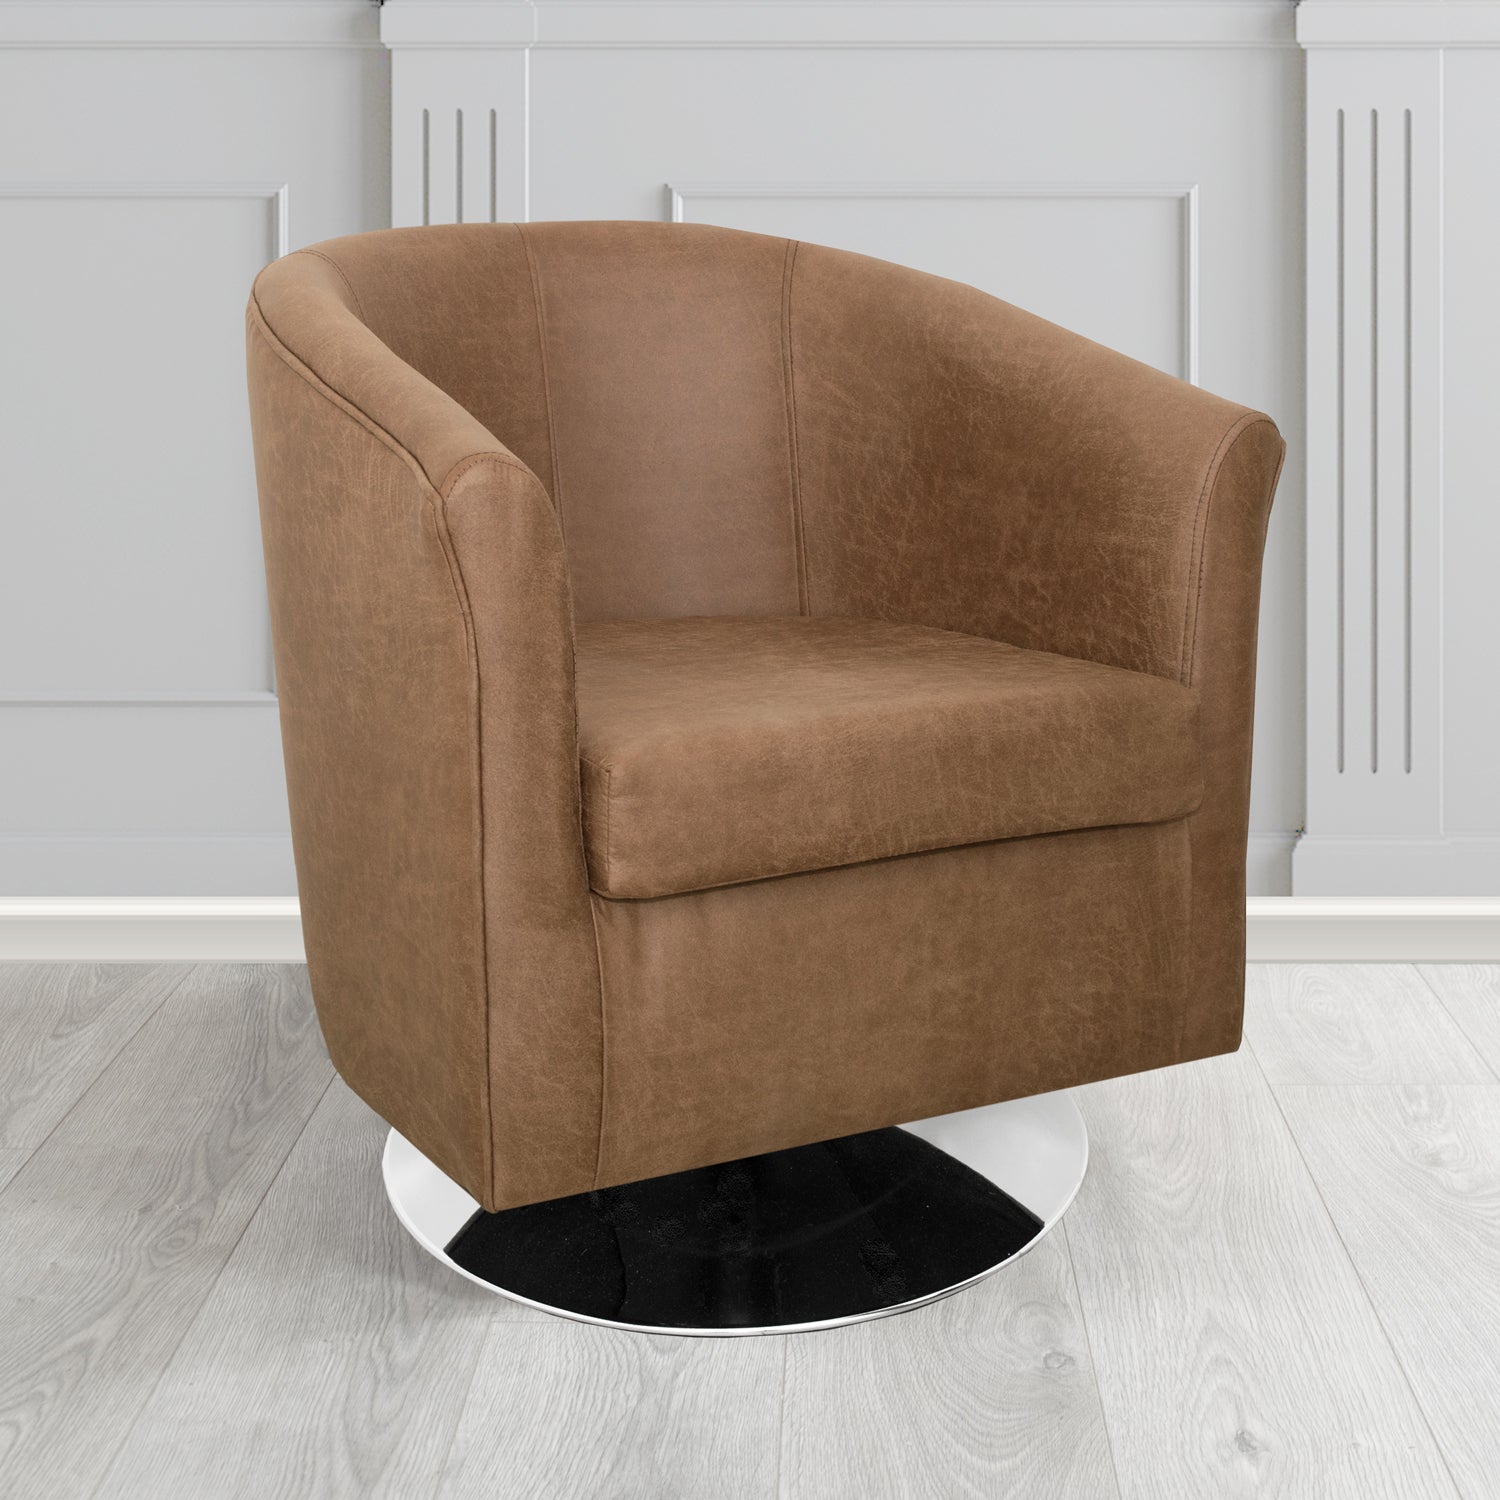 Tuscany Swivel Tub Chair in Nevada Tan Faux Leather - The Tub Chair Shop